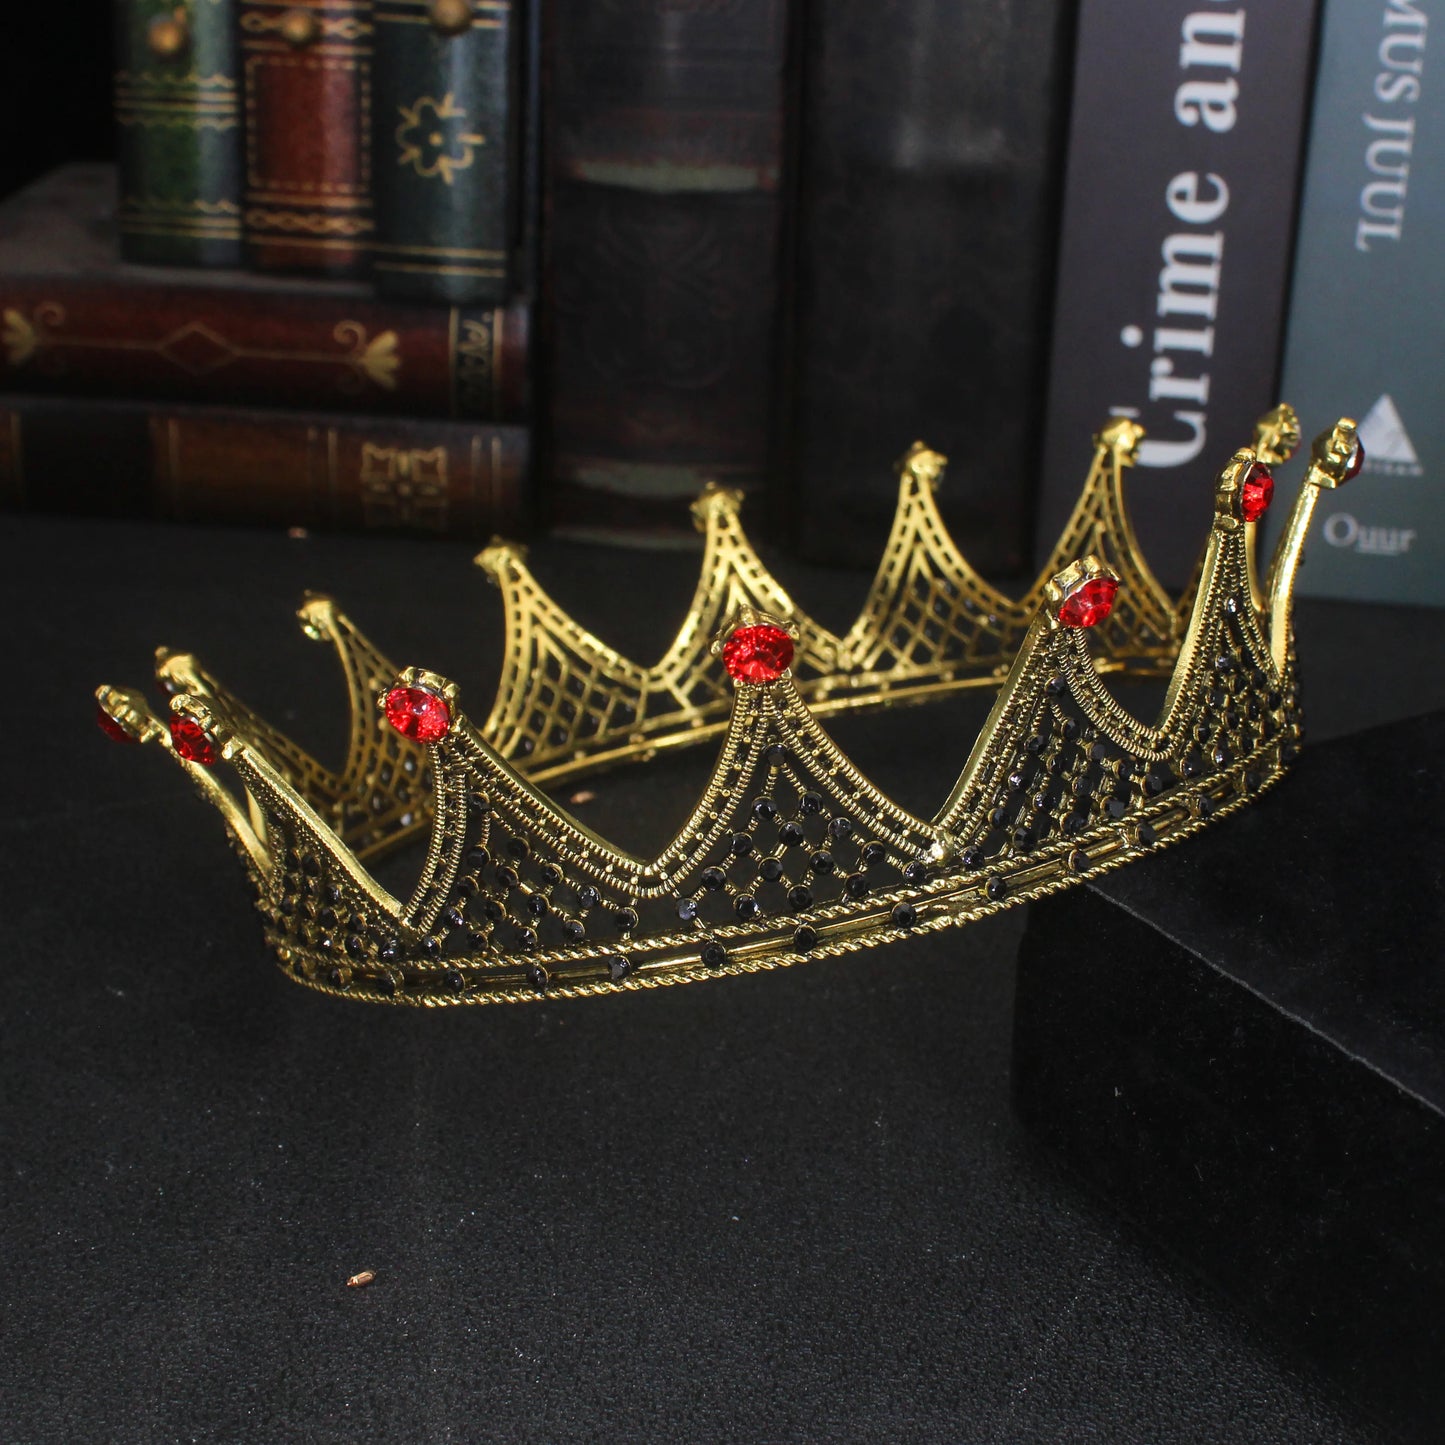 The Victor Crown